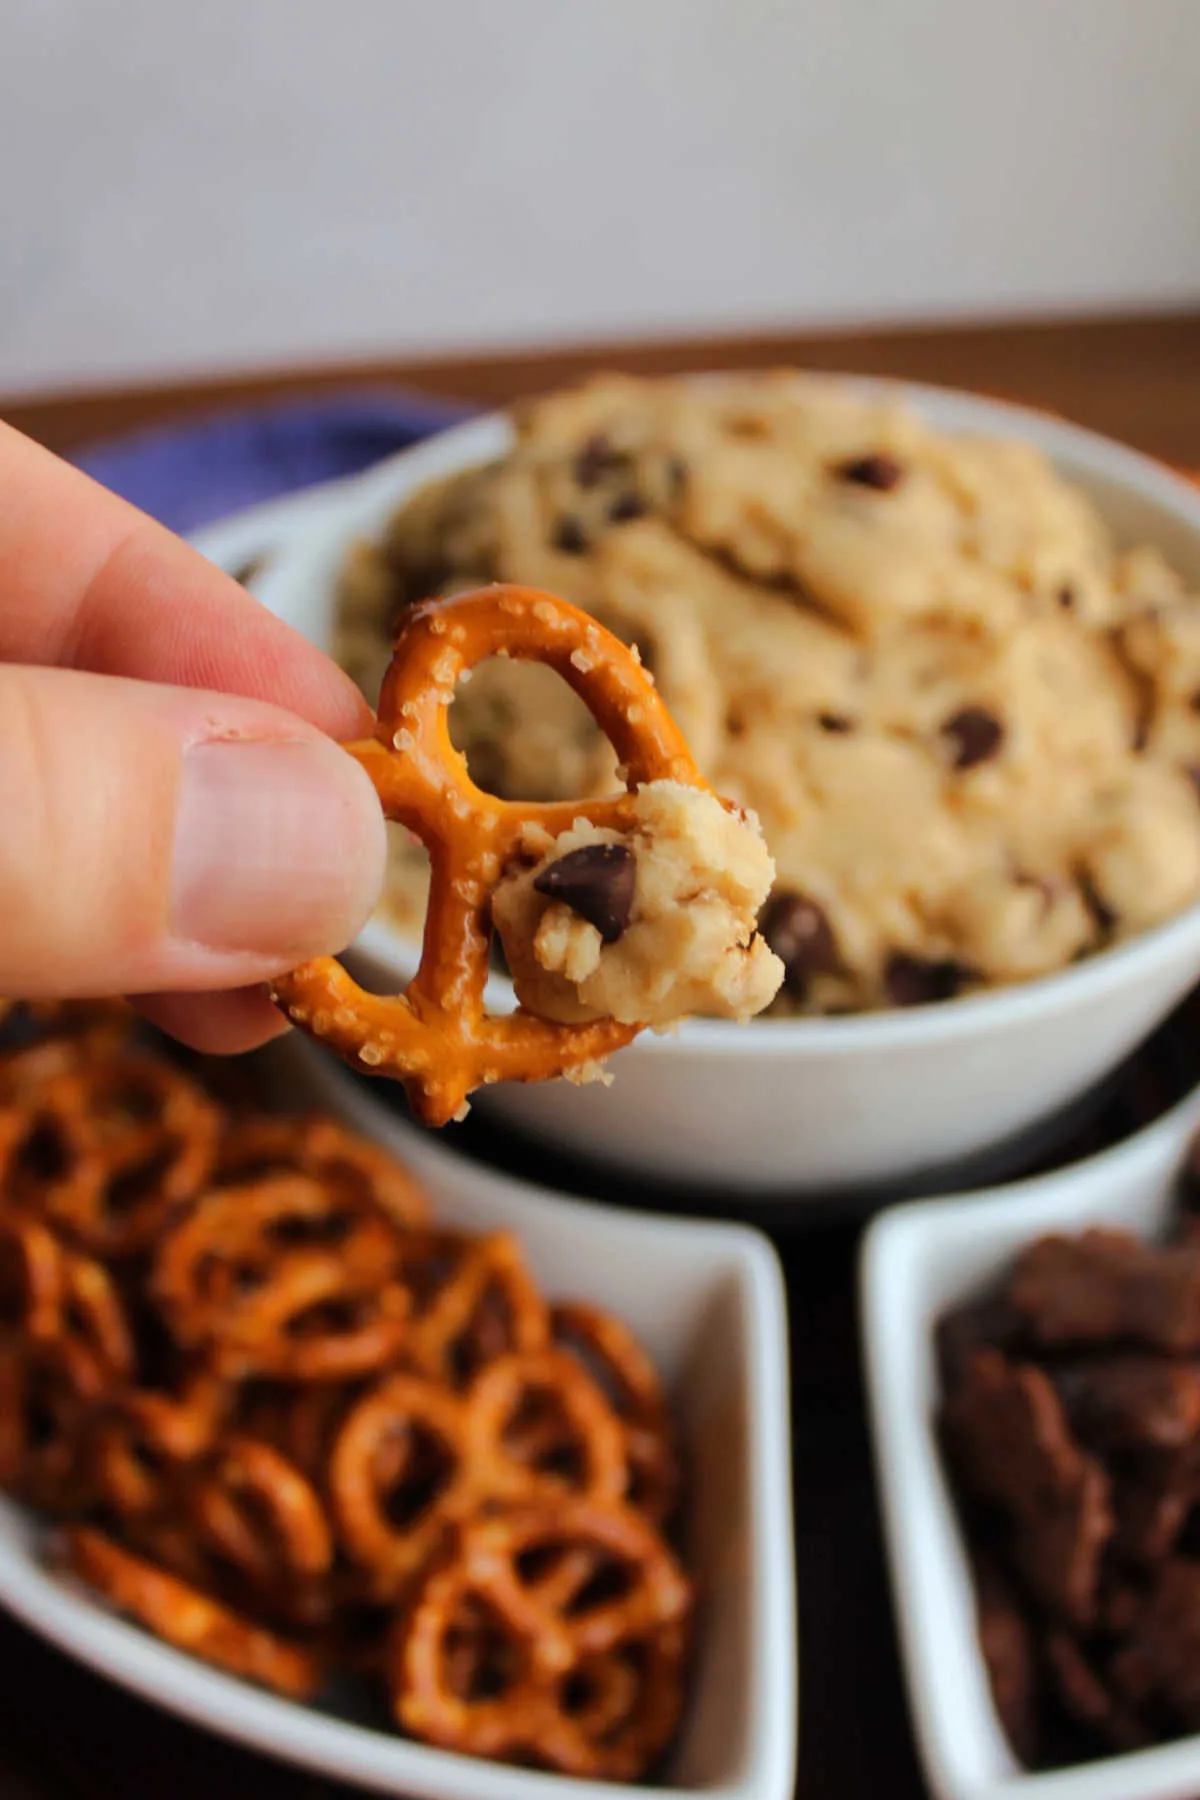 Pretzel dipped into chocolate chip cookie dough ready to eat. 